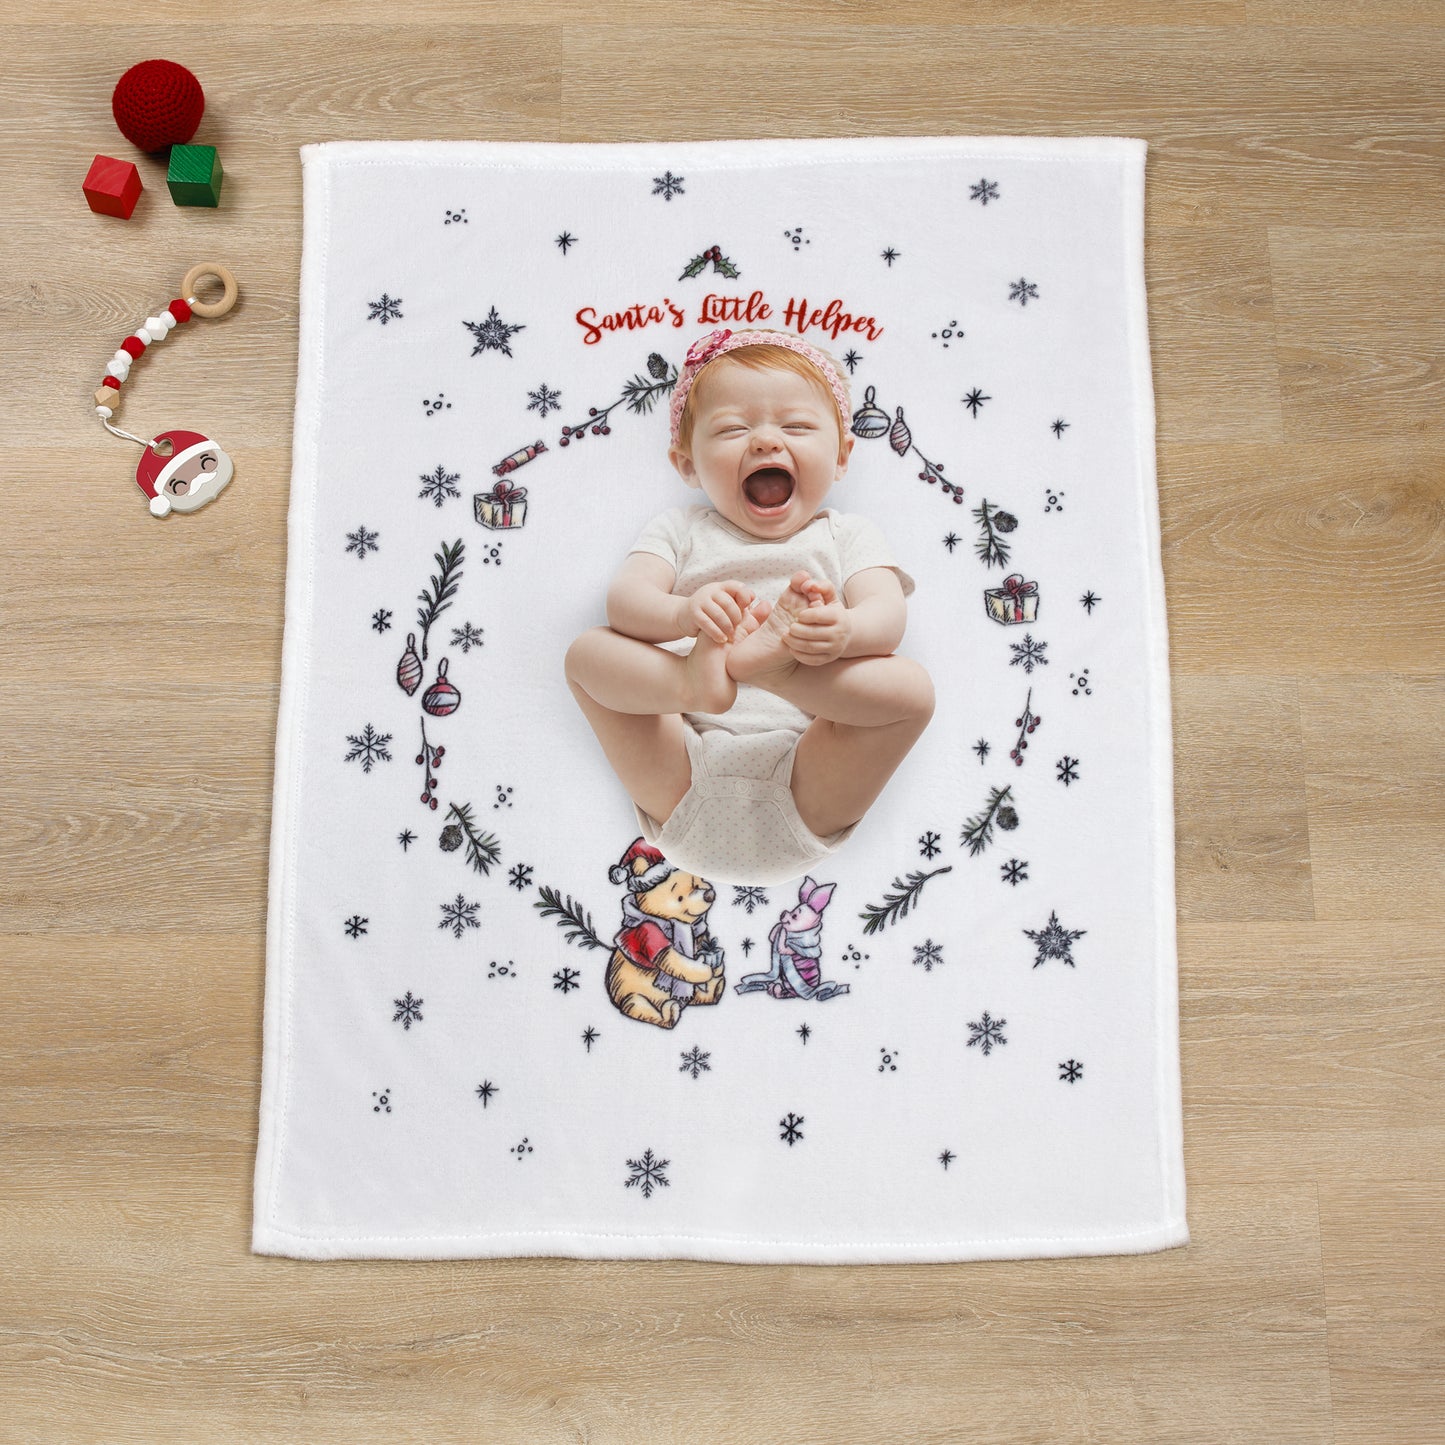 Disney Winnie the Pooh and Piglet White, Red, and Green Christmas Holiday Wreath "Santa's Little Helper" Photo Op Super Soft Baby Blanket